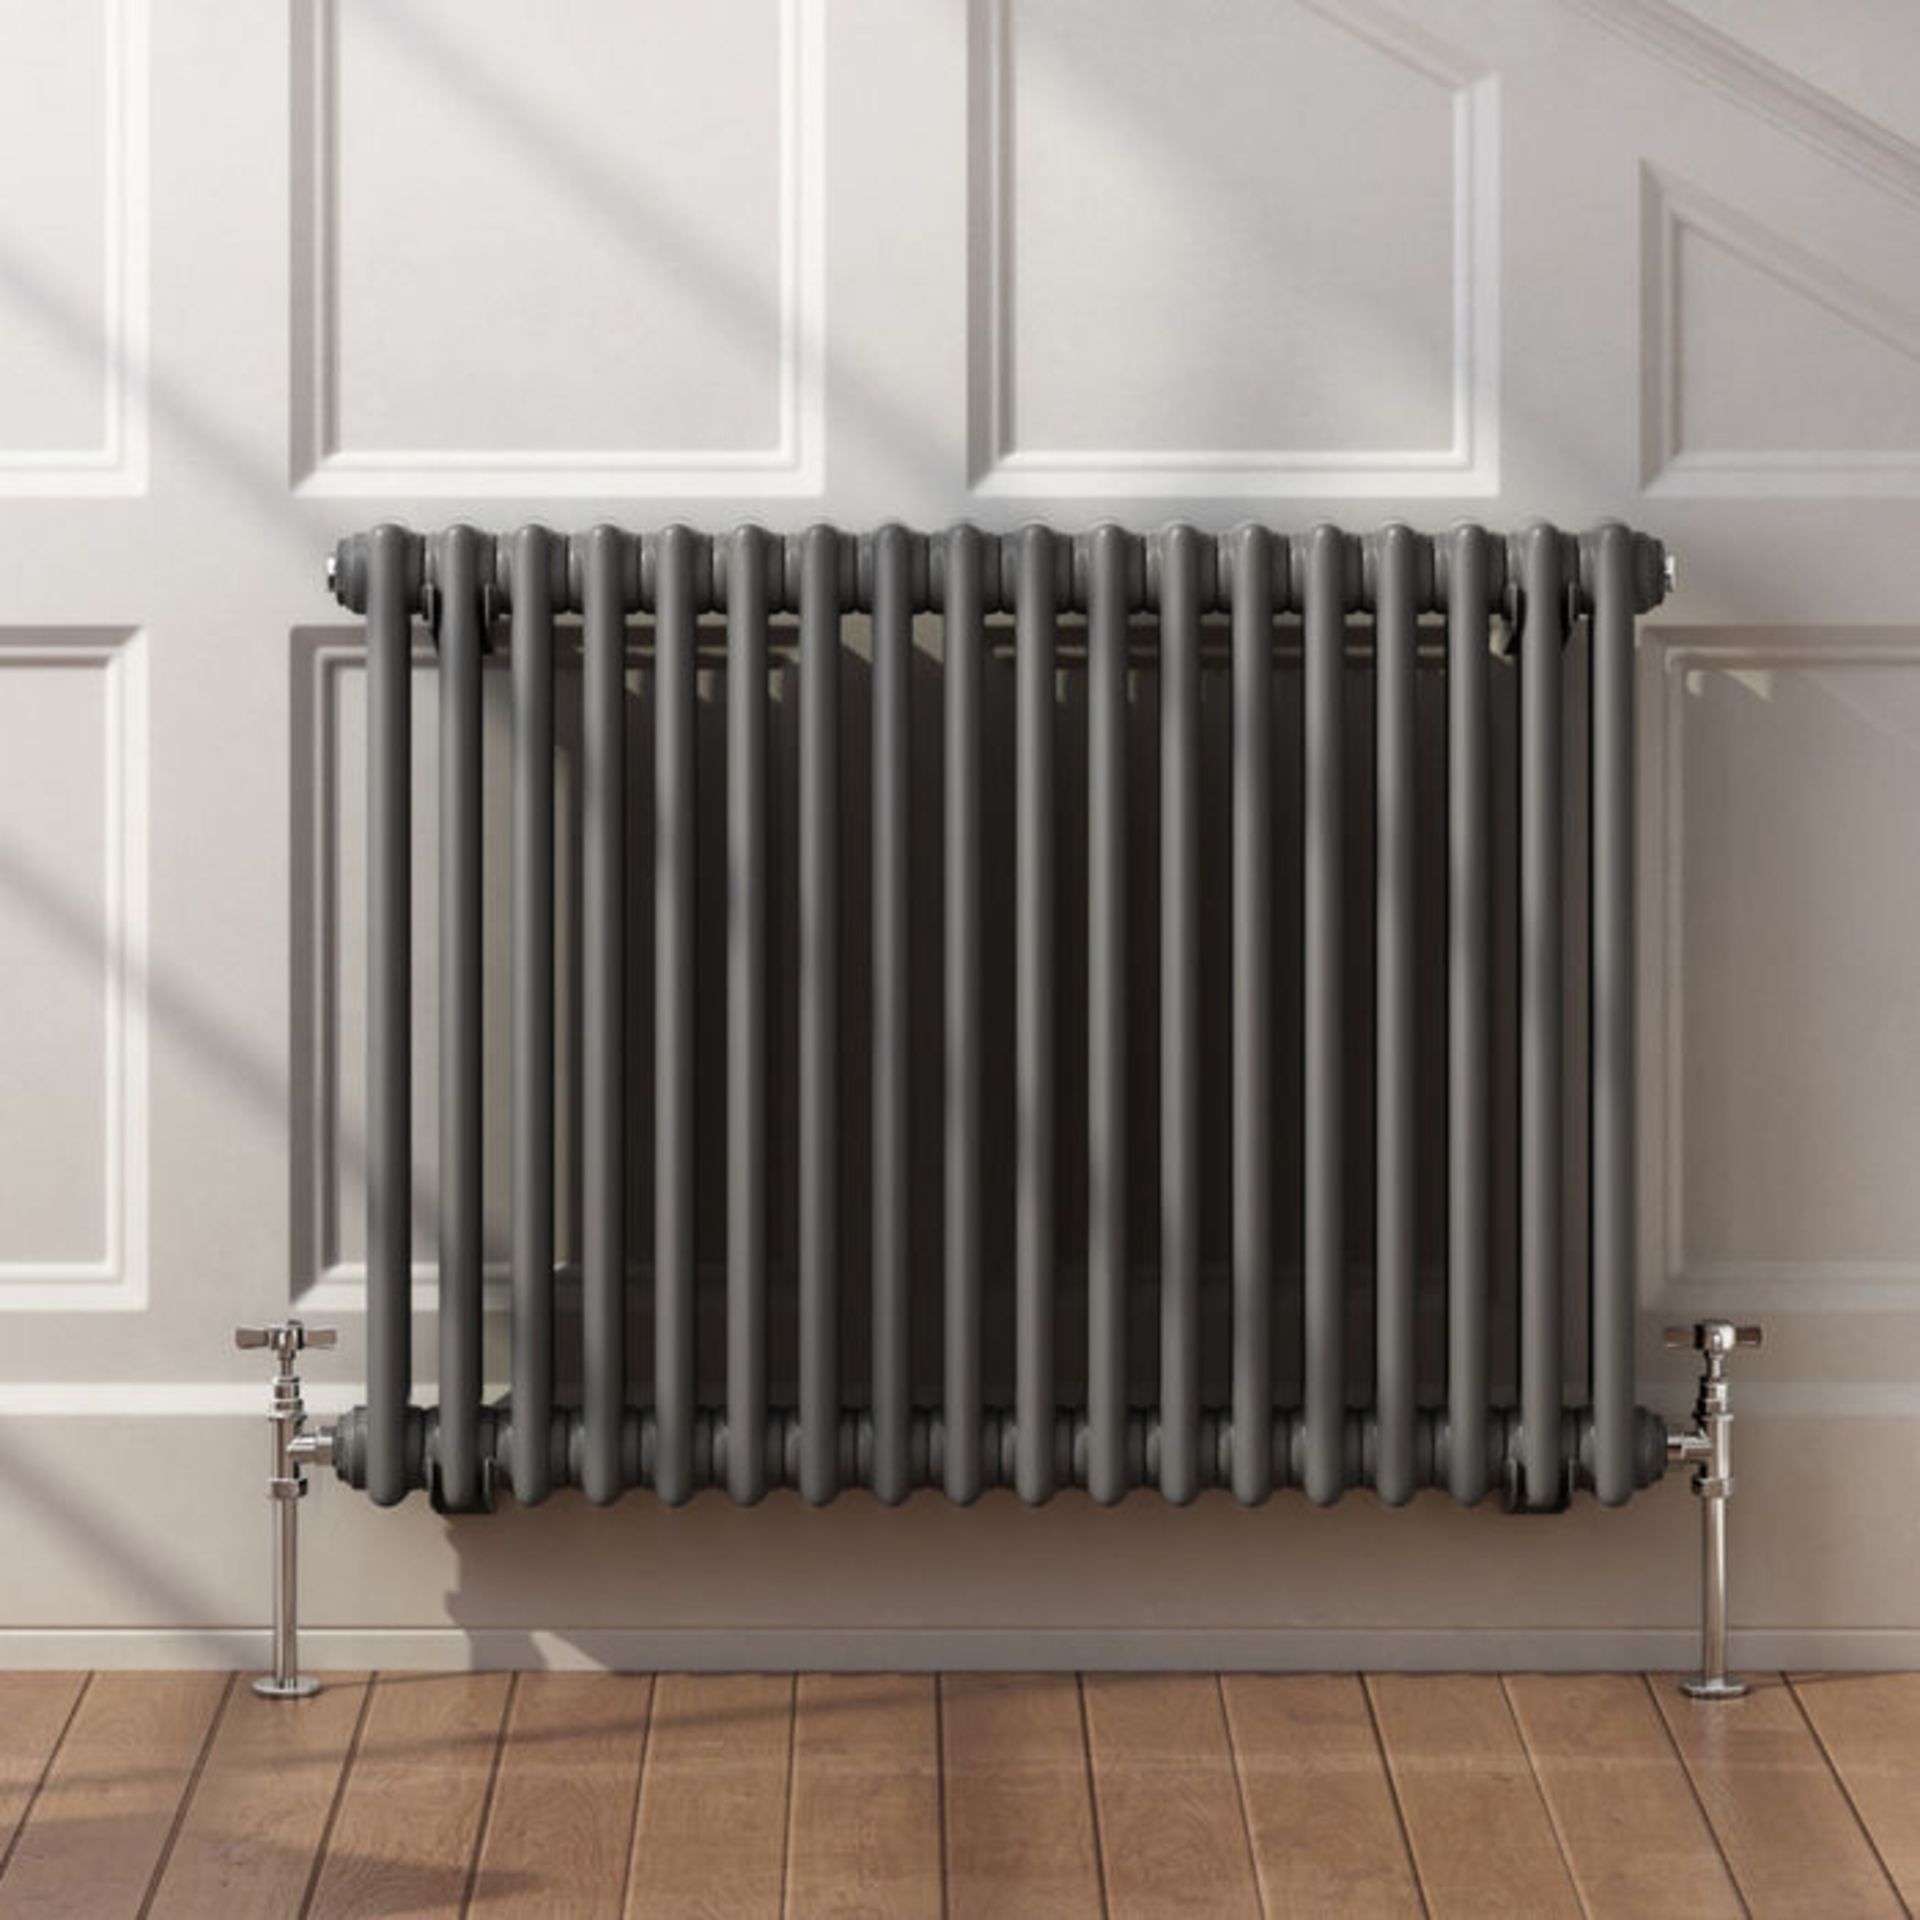 (EY212) 600x828mm Anthracite Double Panel Horizontal Colosseum Traditional Radiator. RRP £439.99. - Image 2 of 3